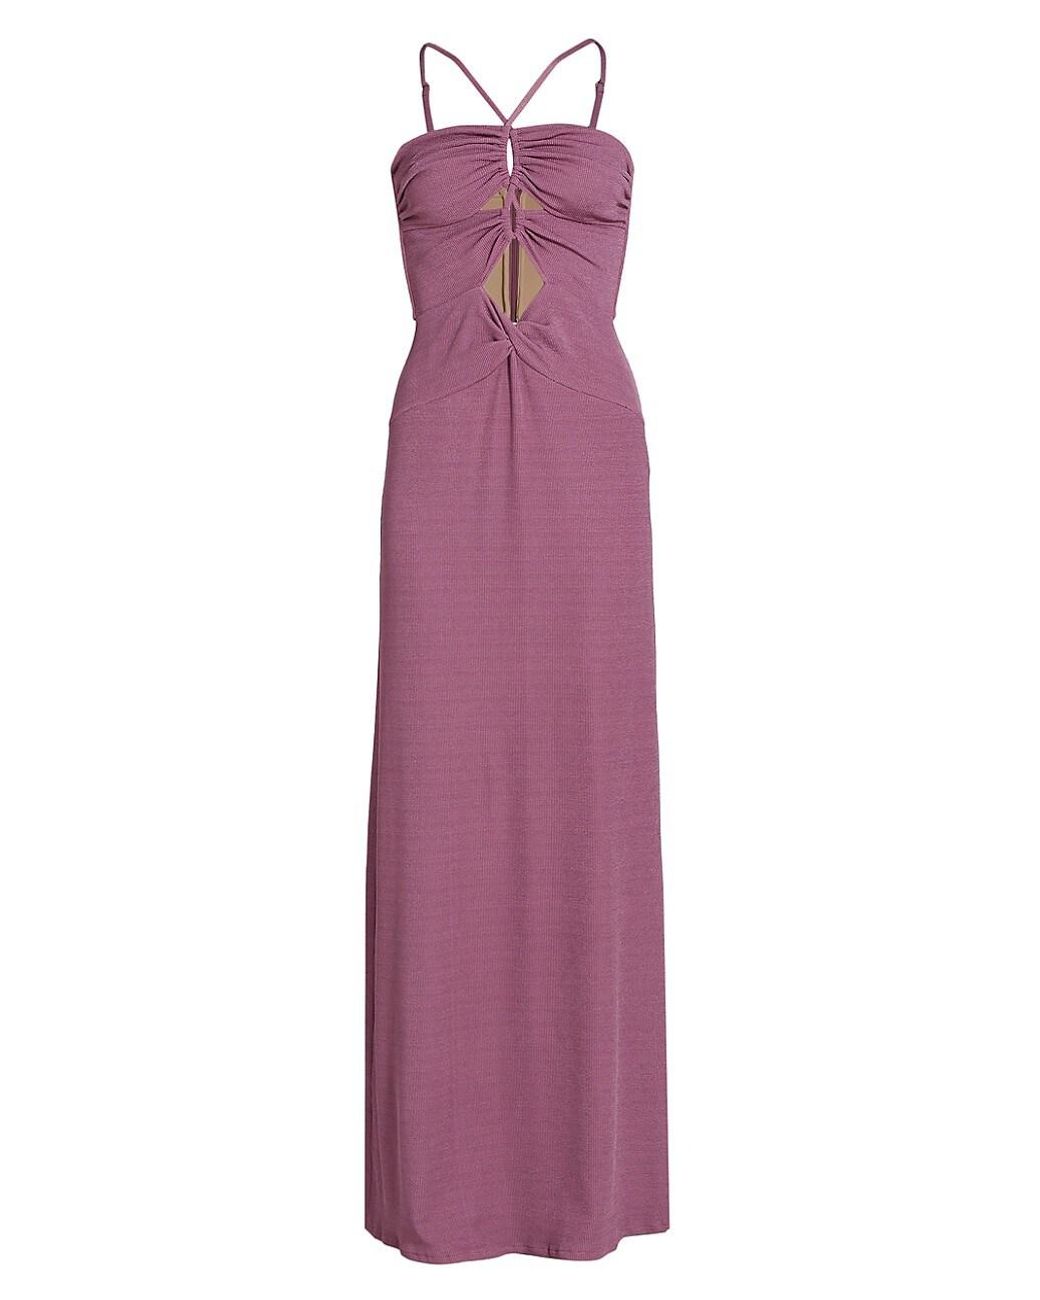 PATBO Synthetic Halter Cut-out Maxi Dress in Purple | Lyst